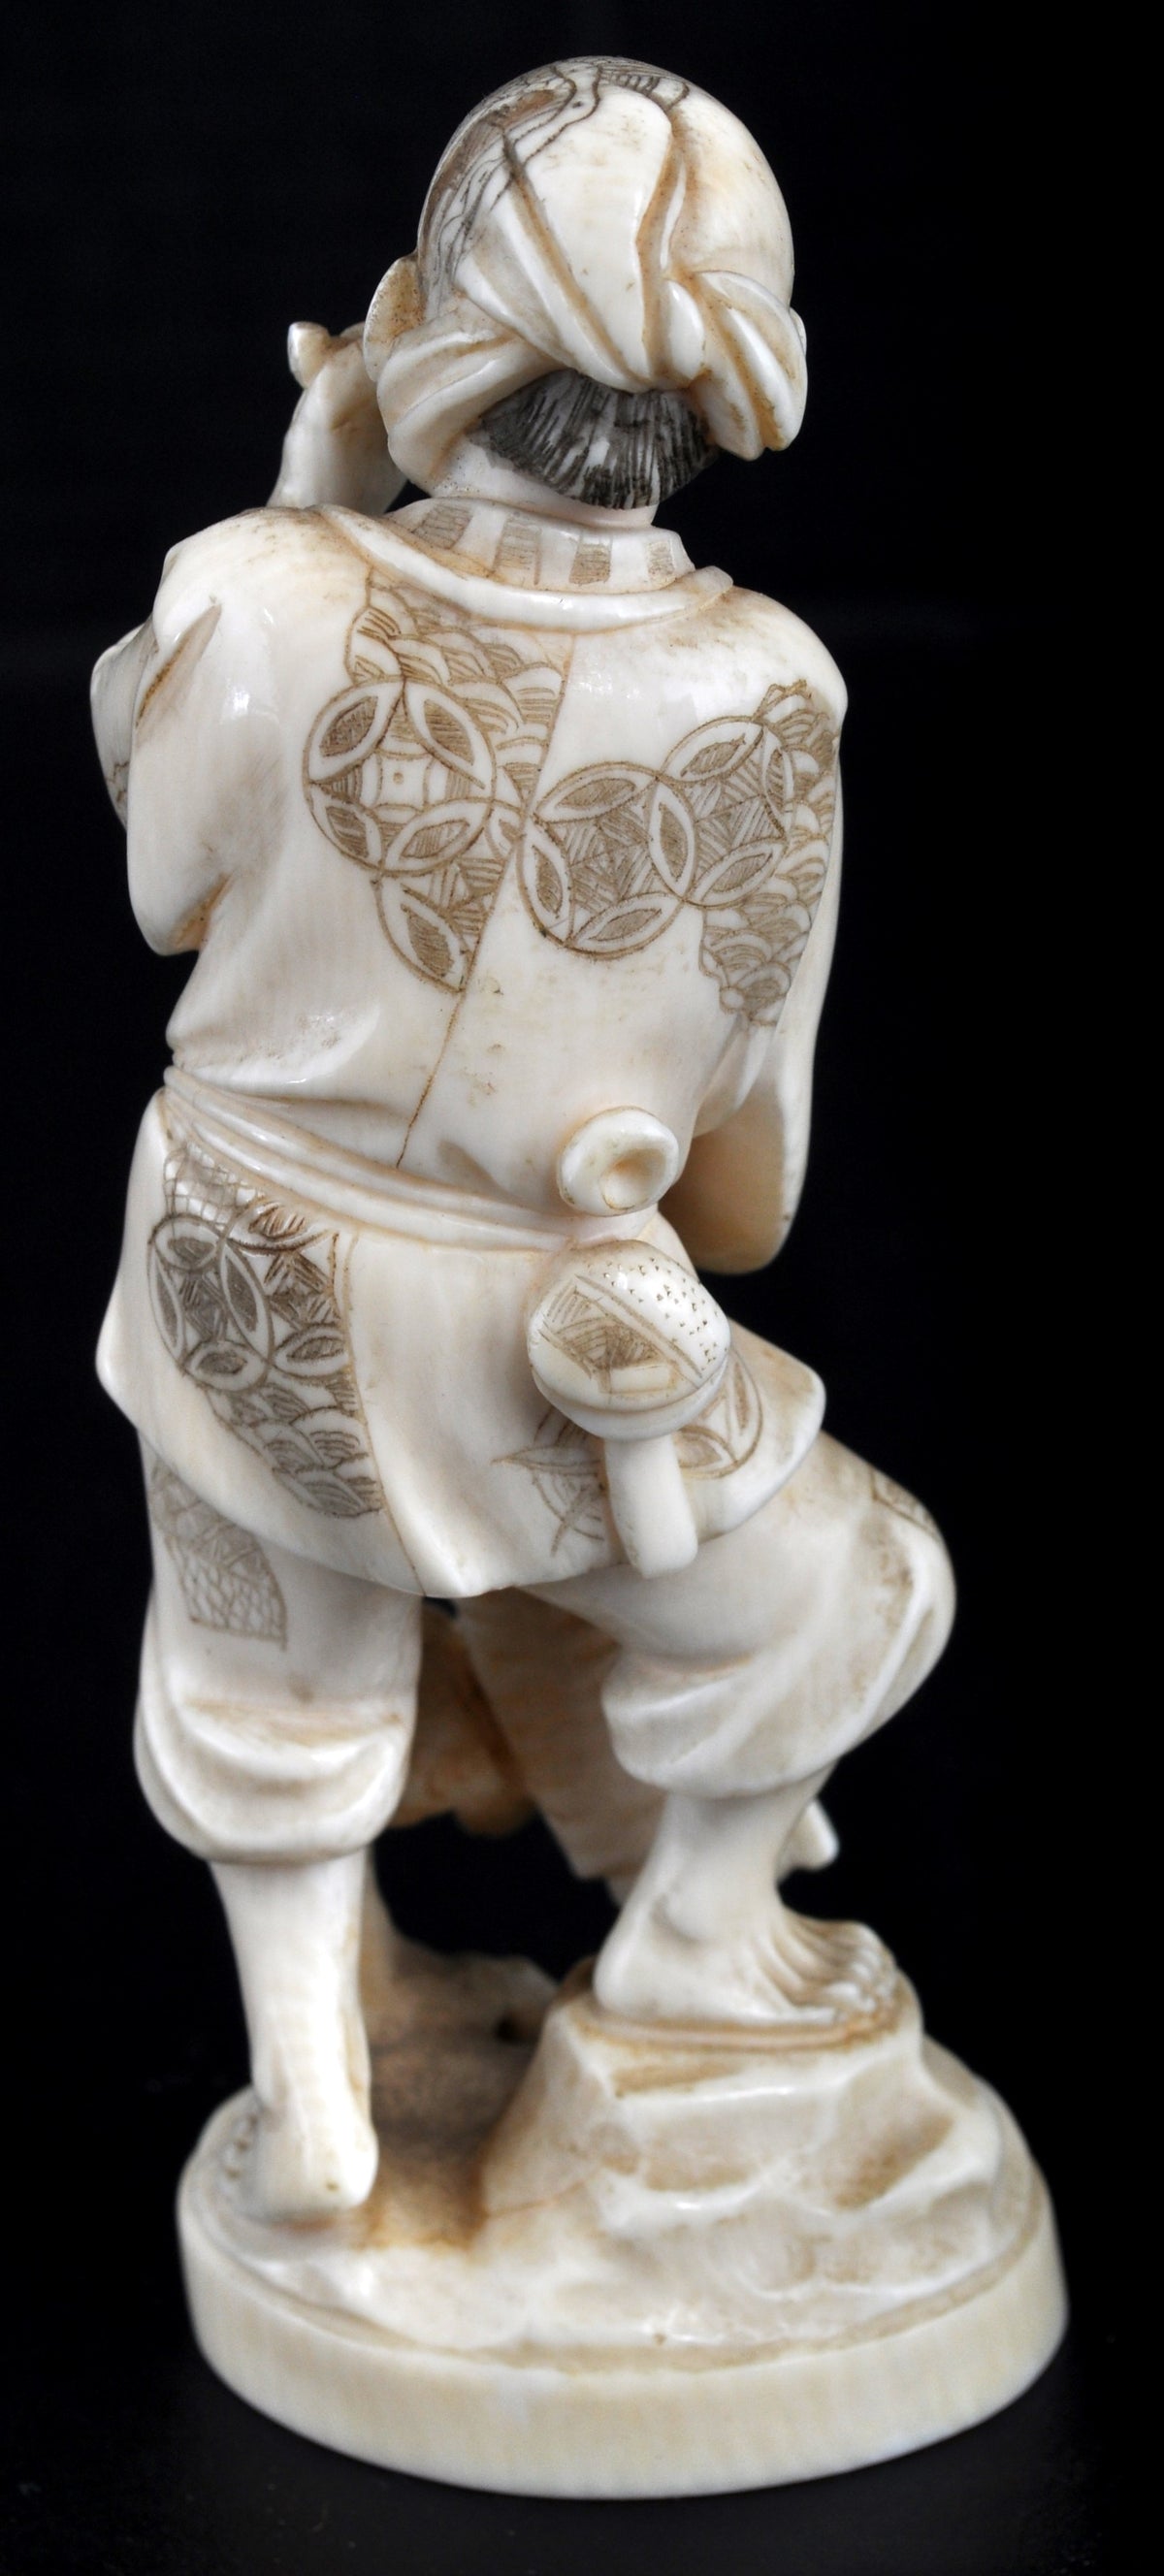 Antique Japanese Meiji Period Carved Ivory Figure, Circa 1880